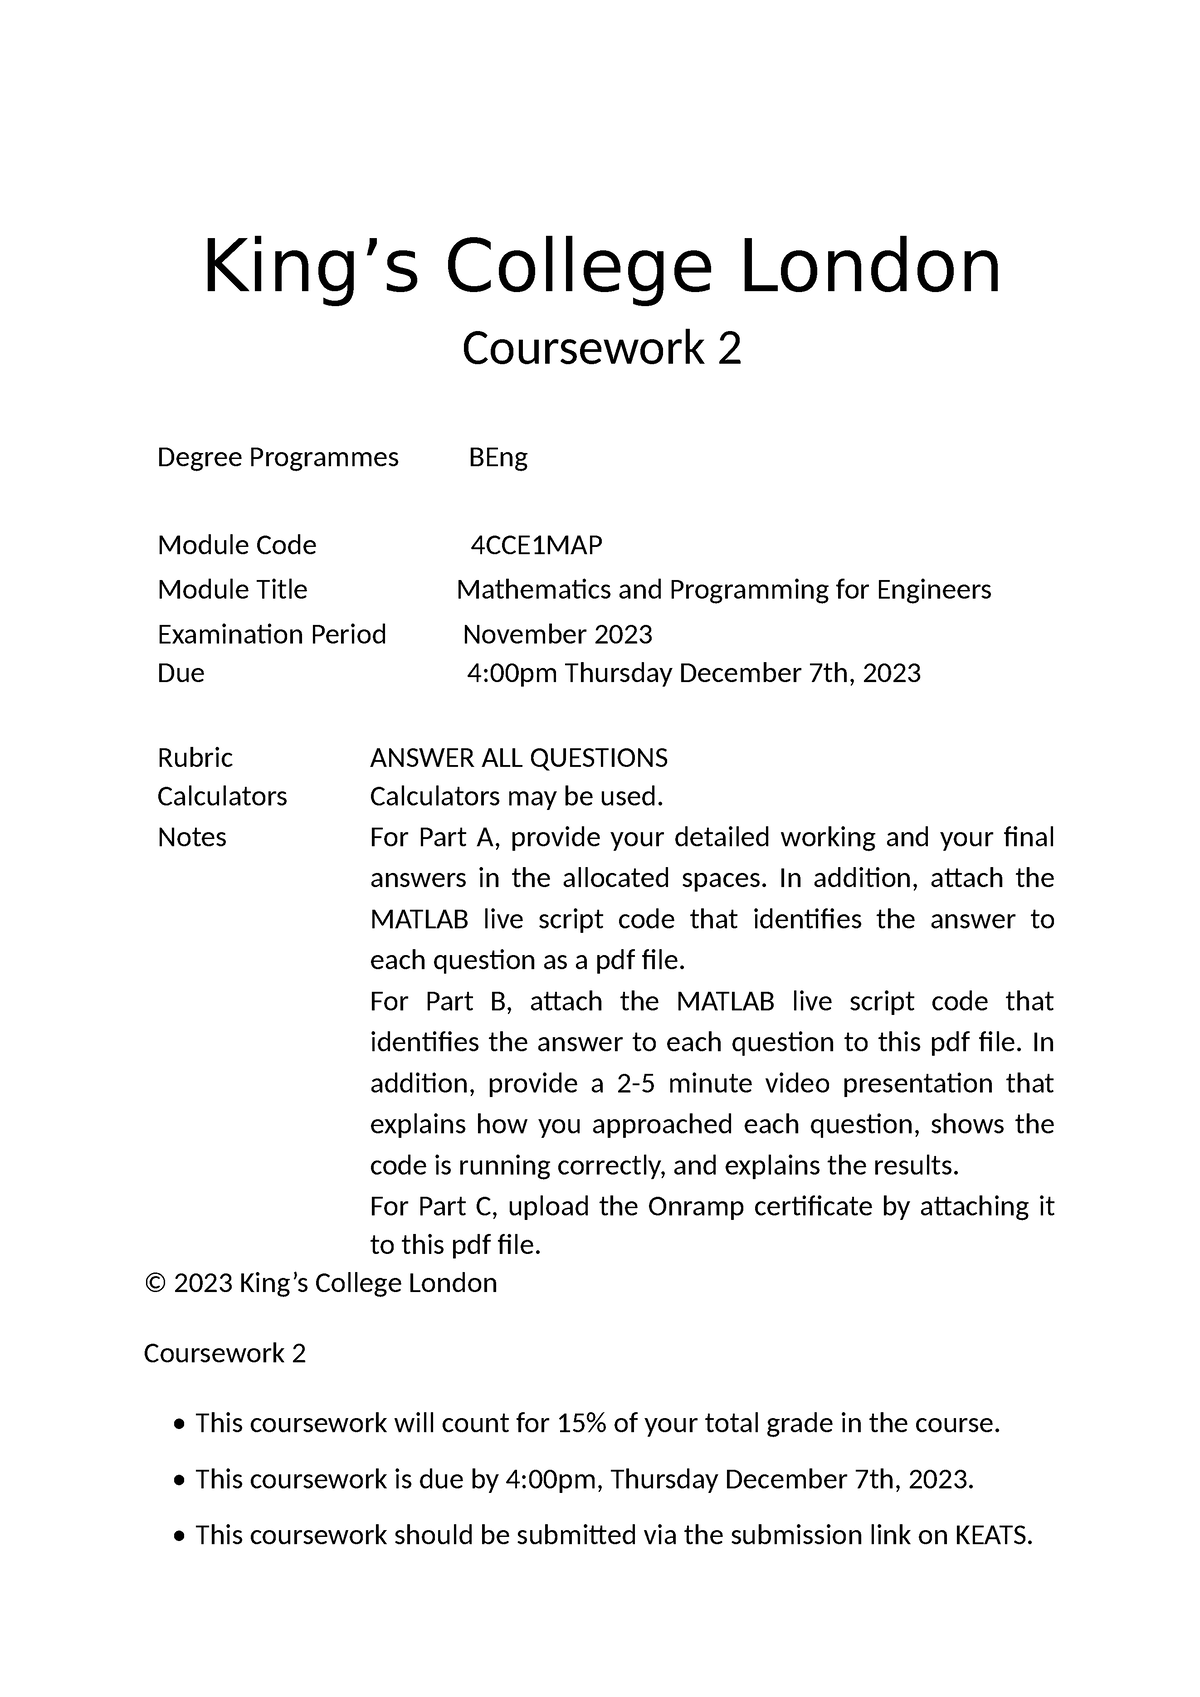 king's college london coursework